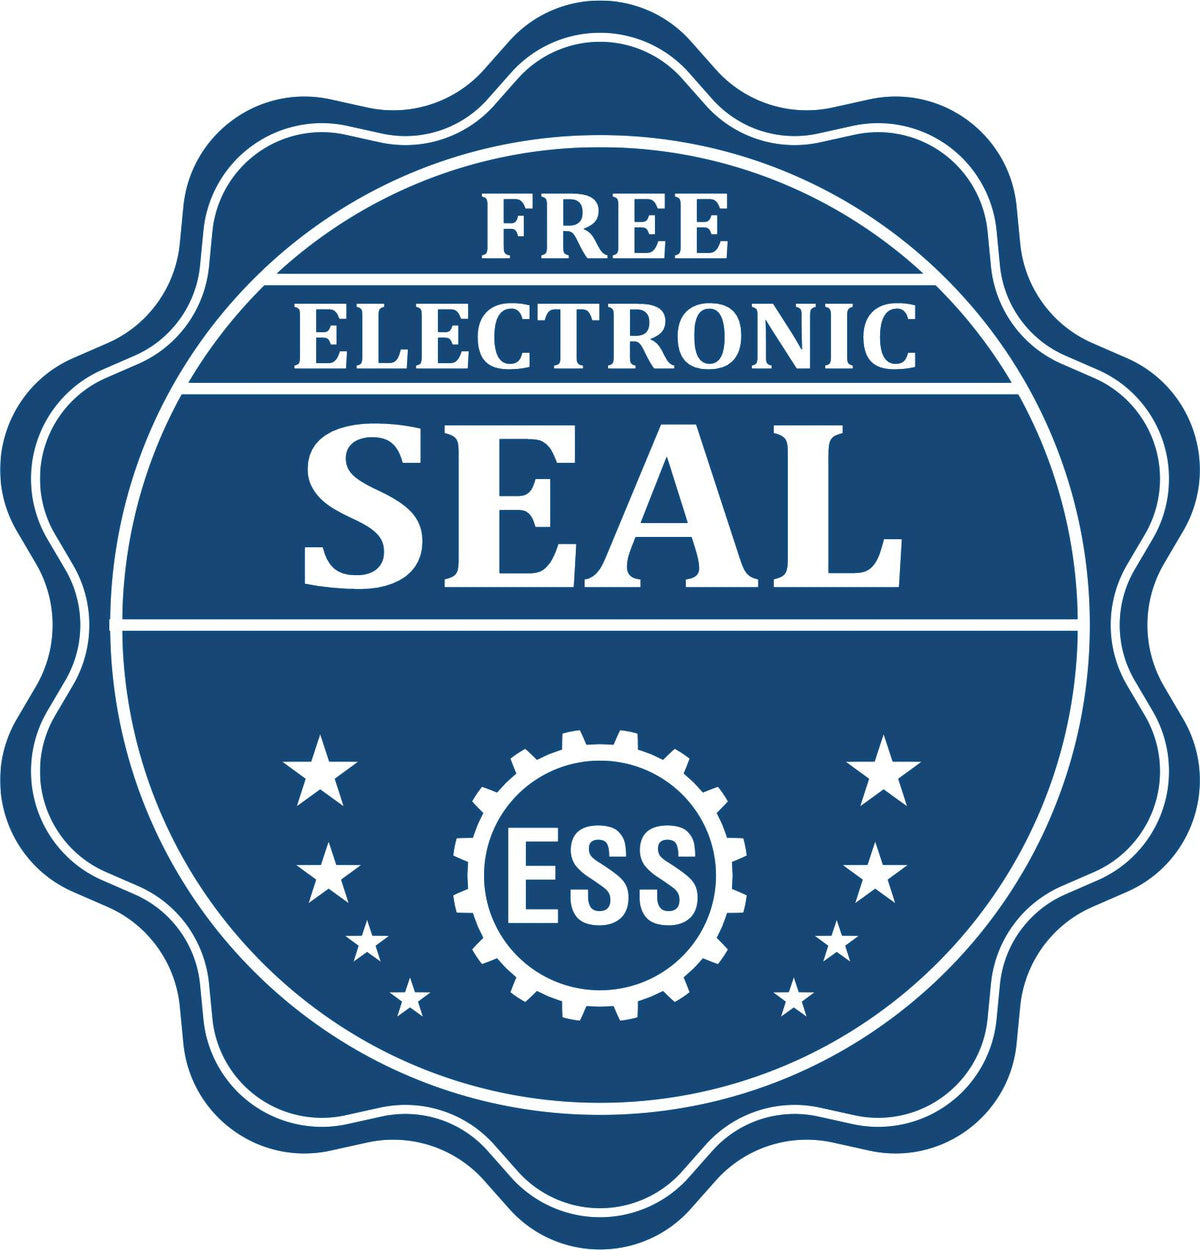 A badge showing a free electronic seal for the Super Slim New Hampshire Notary Public Stamp with stars and the ESS gear on the emblem.